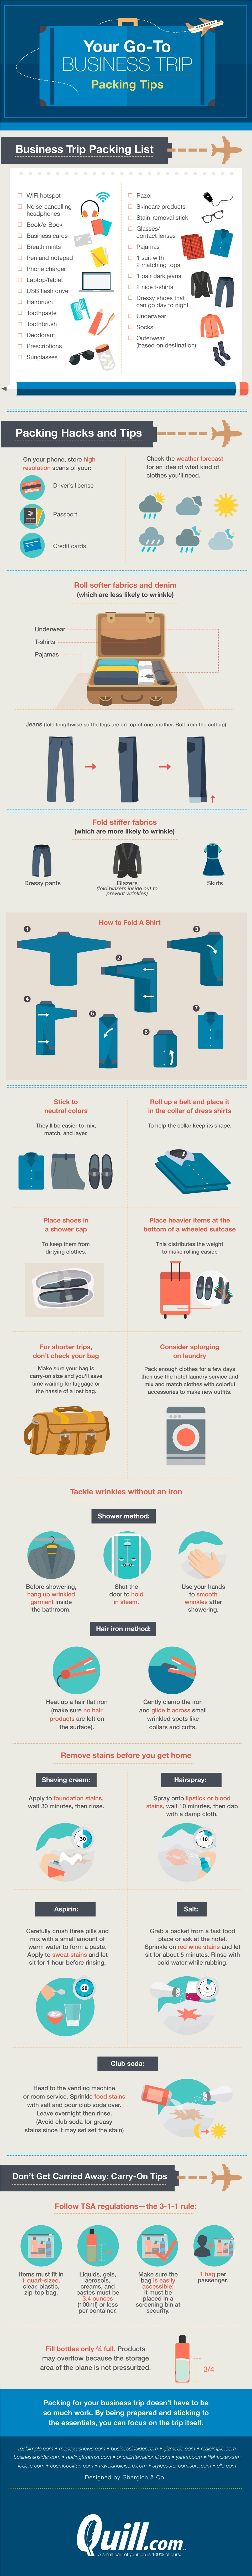 business-trip-packing-tips-infographic.jpg